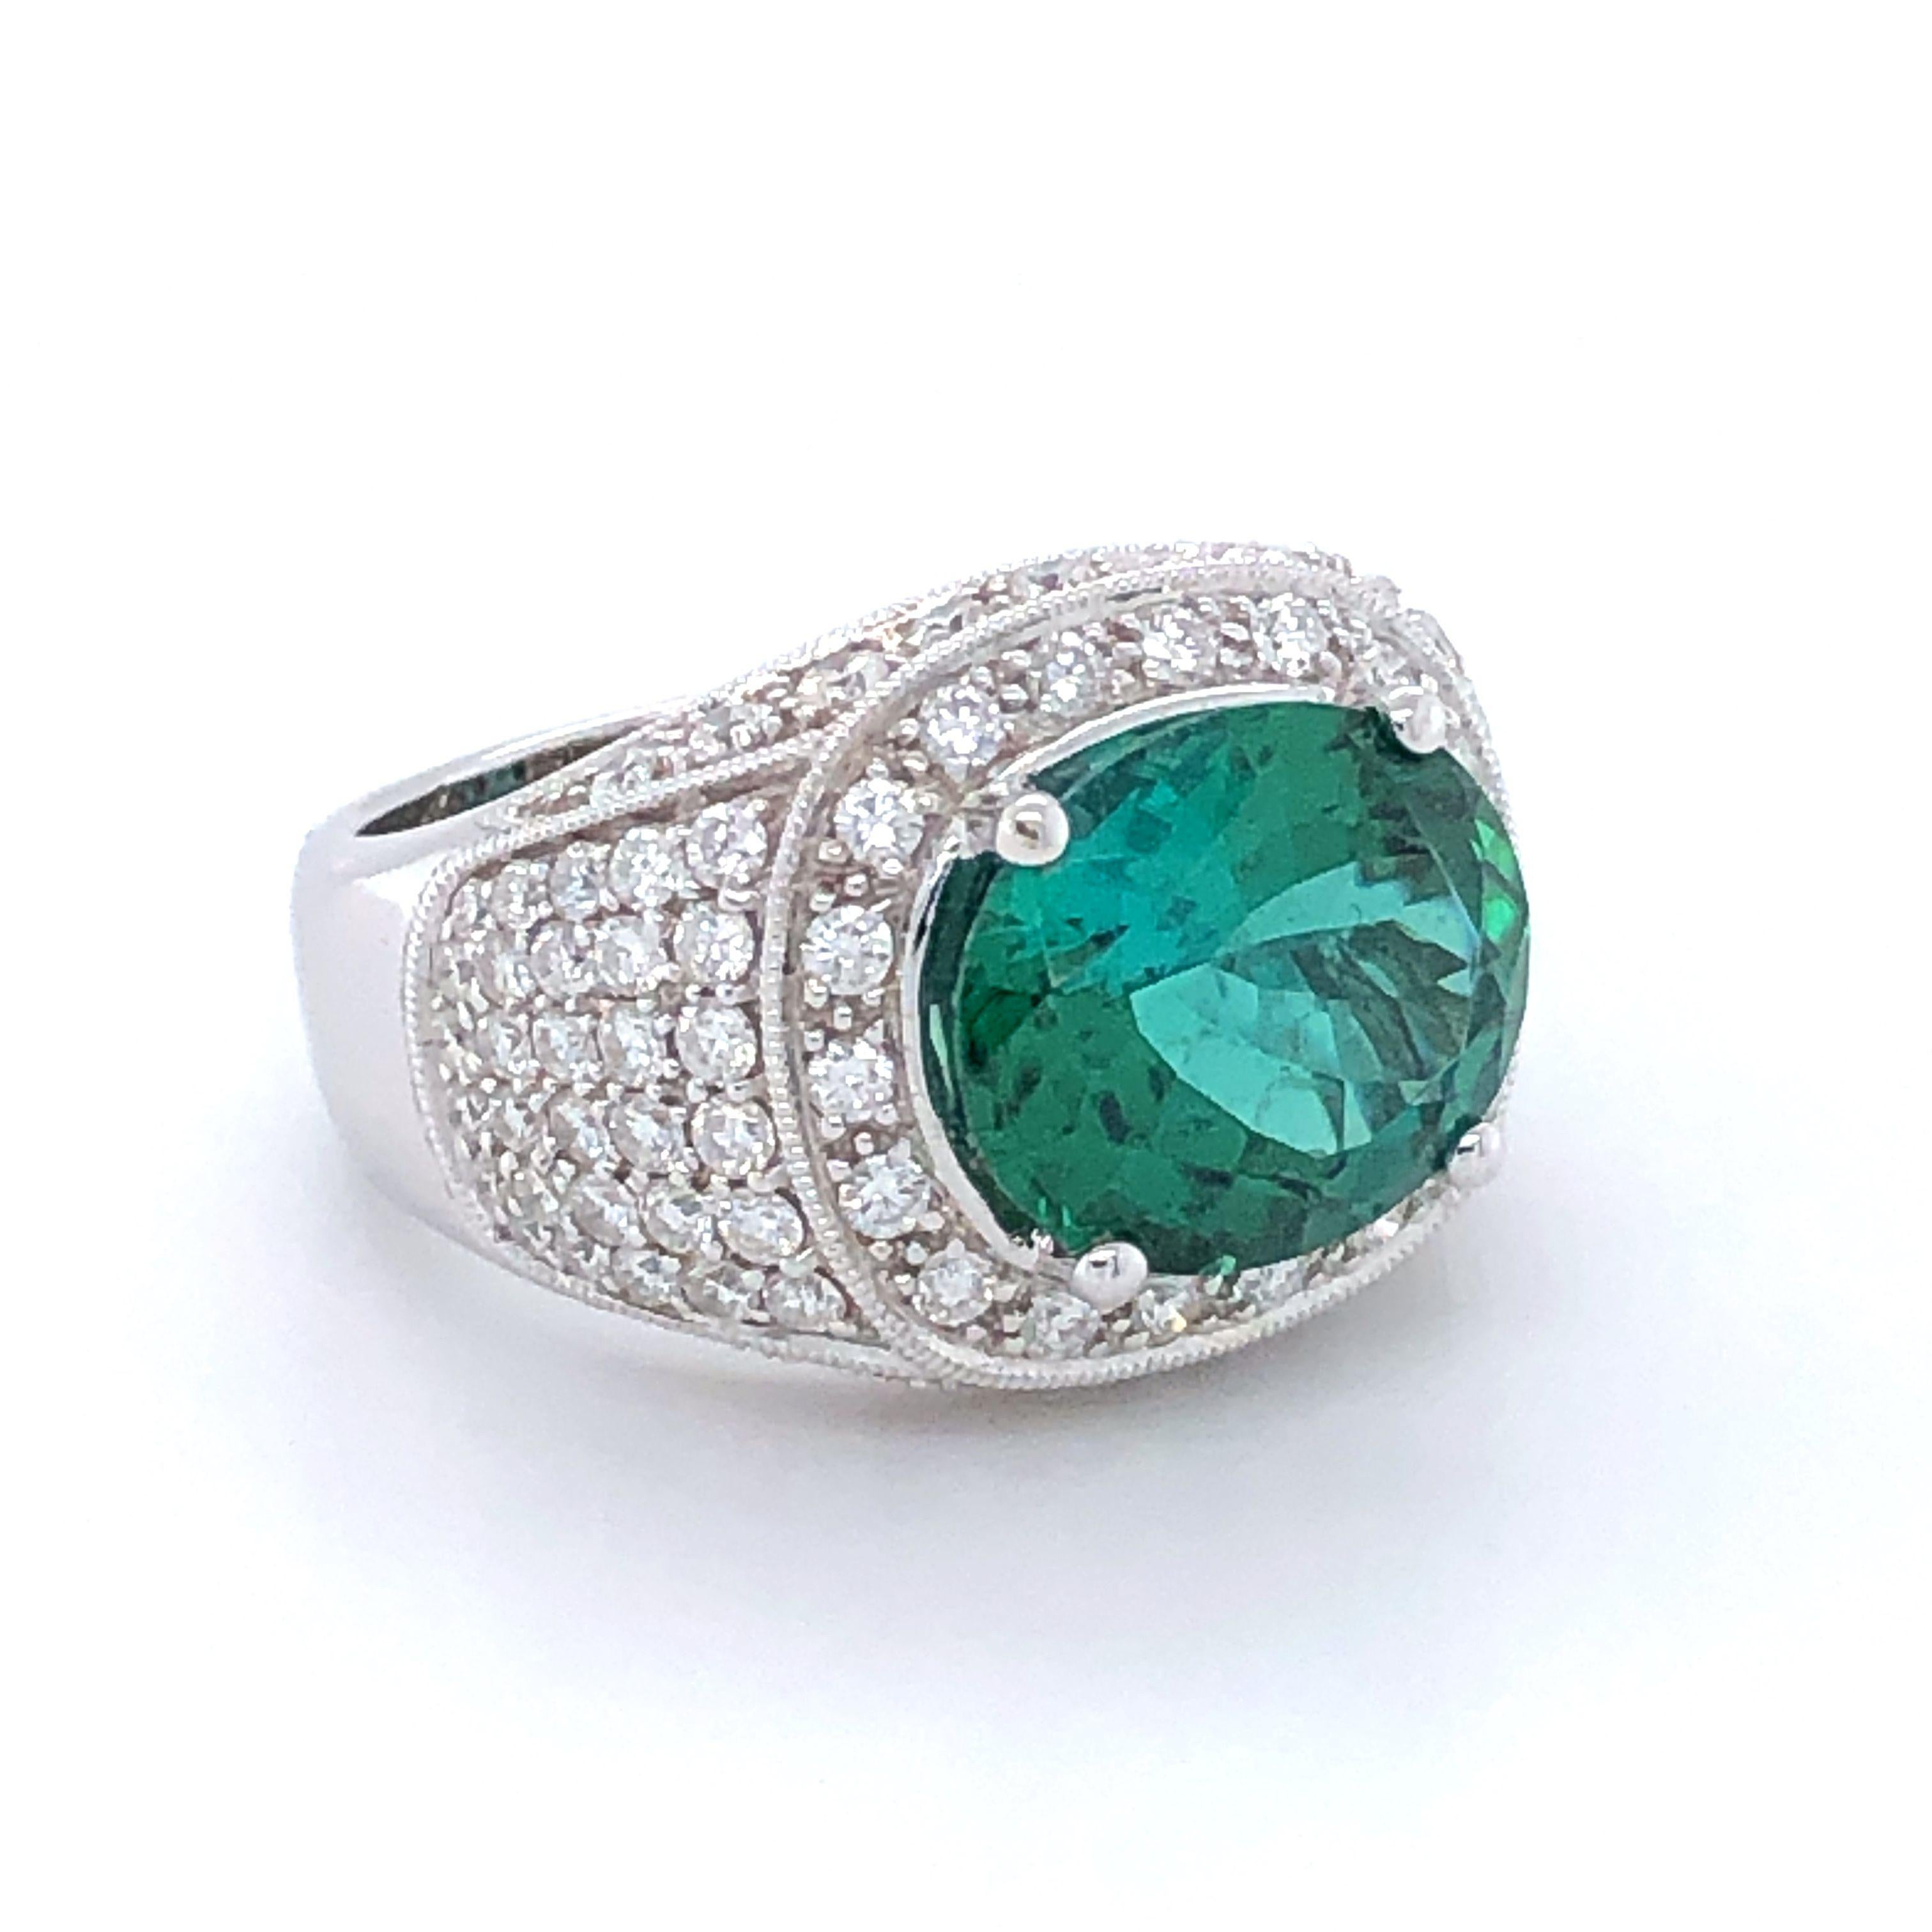 18k White Gold 5.0ct Tsavorite And .91ct Diamond Ring

Big Tsavorites are hard to find. Only way to do justice to this huge stone was to give it a boulderish look and surrounding it with halo of diamondsItem:
 # 03866
Metal: 18k White Gold
Color